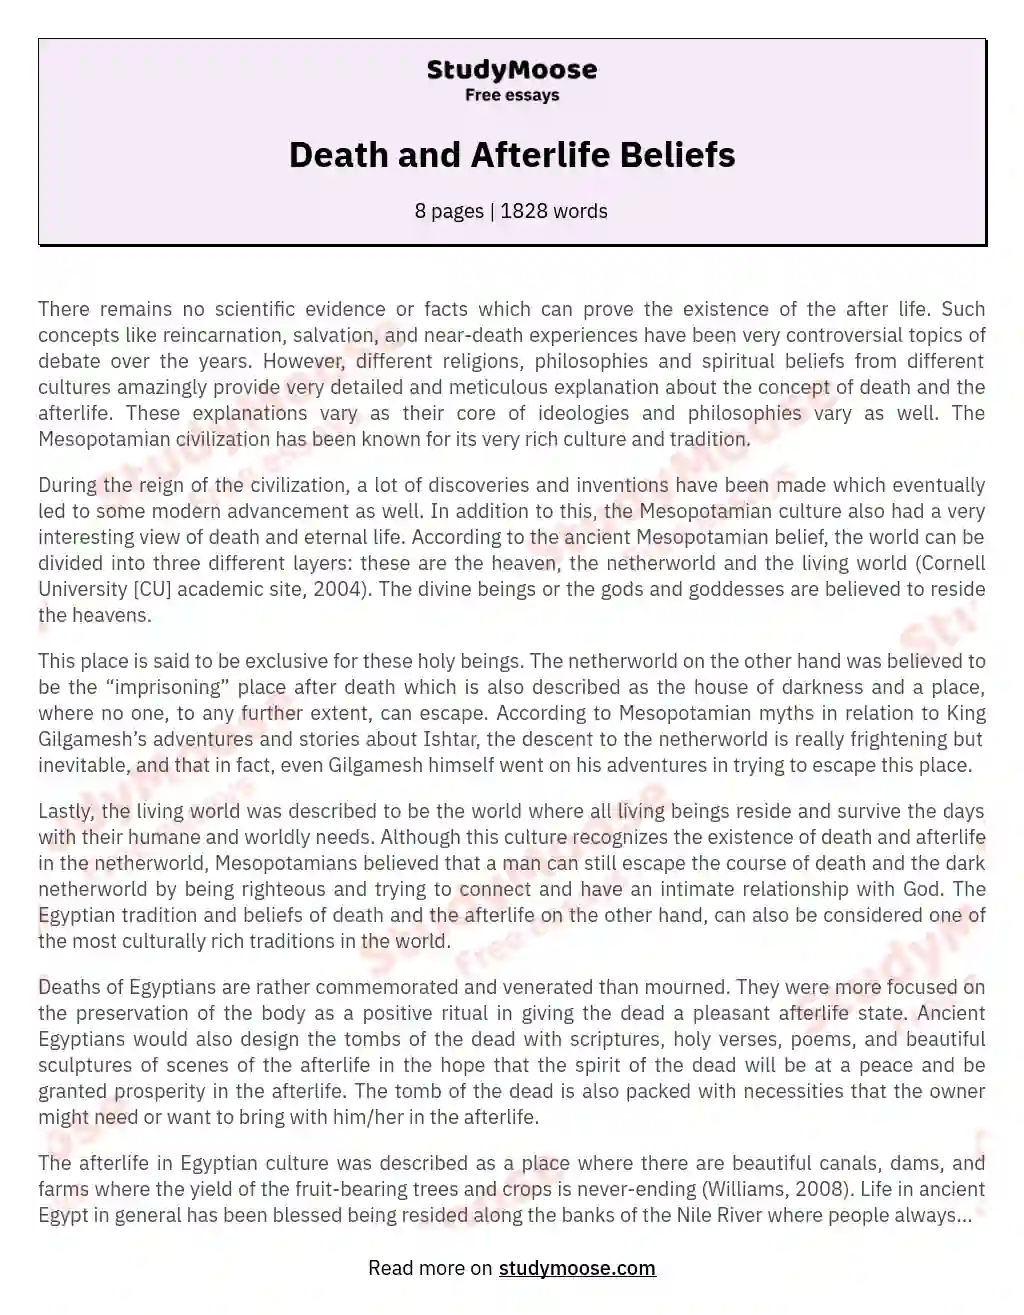 Death and Afterlife Beliefs essay